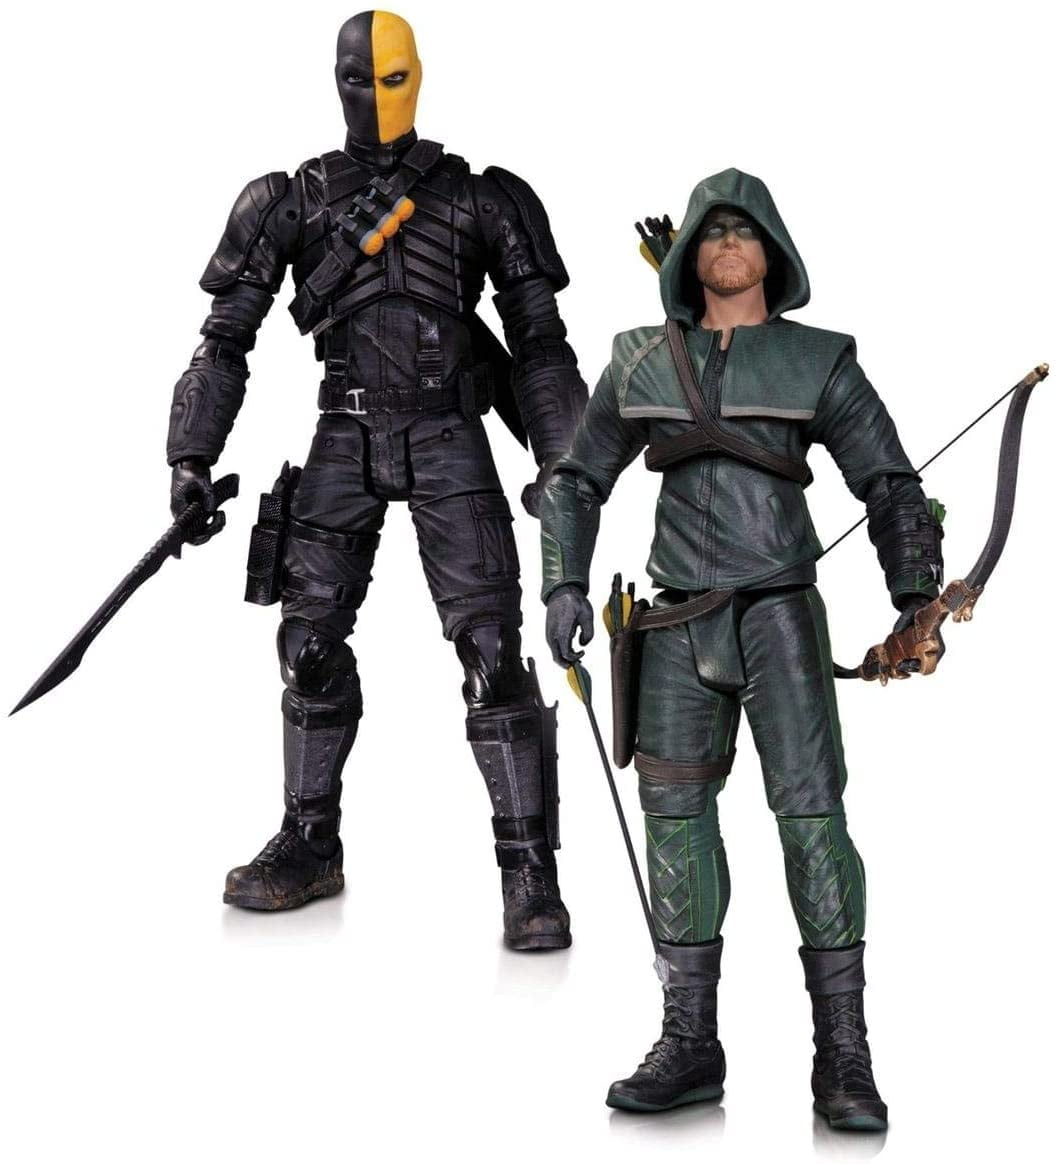 DC Comics Justice League Deathstroke 12 Action Figure Kid Toy Gift 